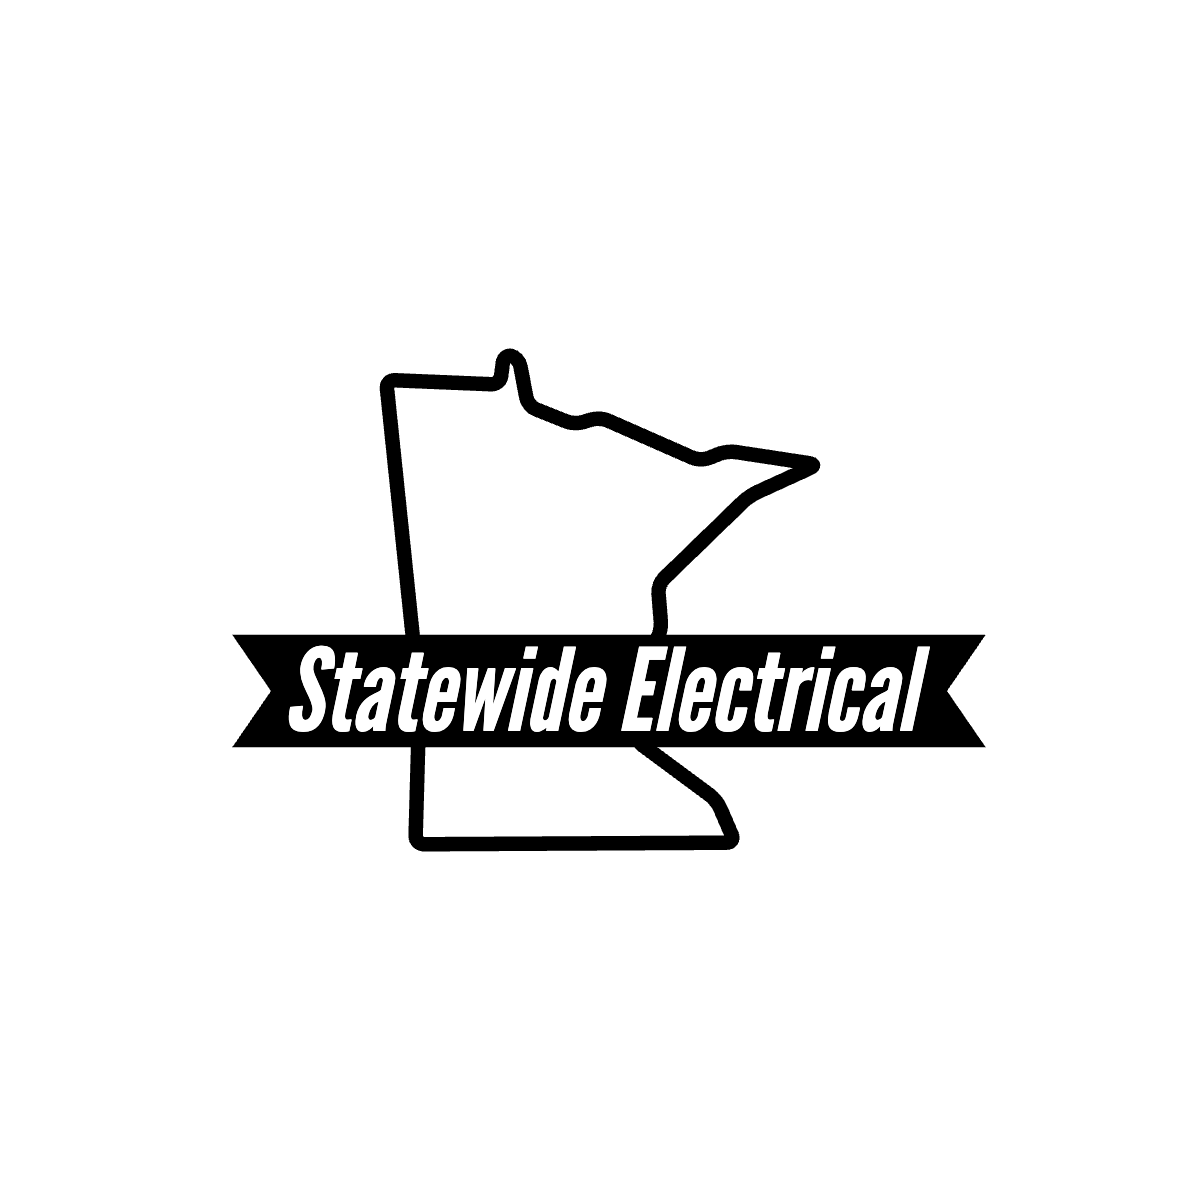 Statewide Electrical Inc